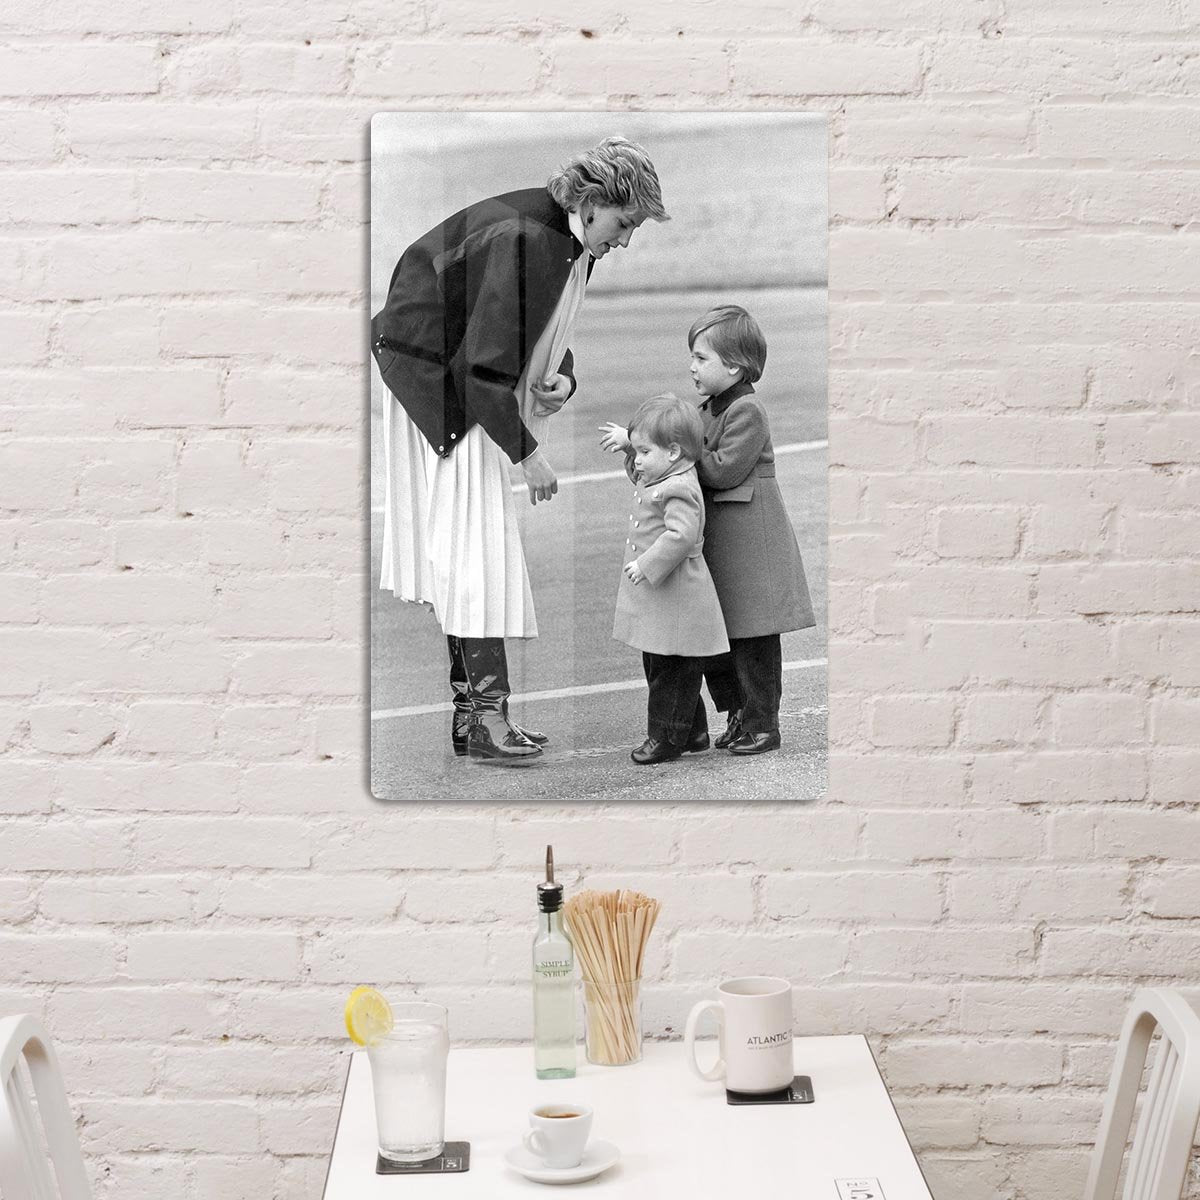 Princess Diana with little Prince Harry and Prince William HD Metal Print